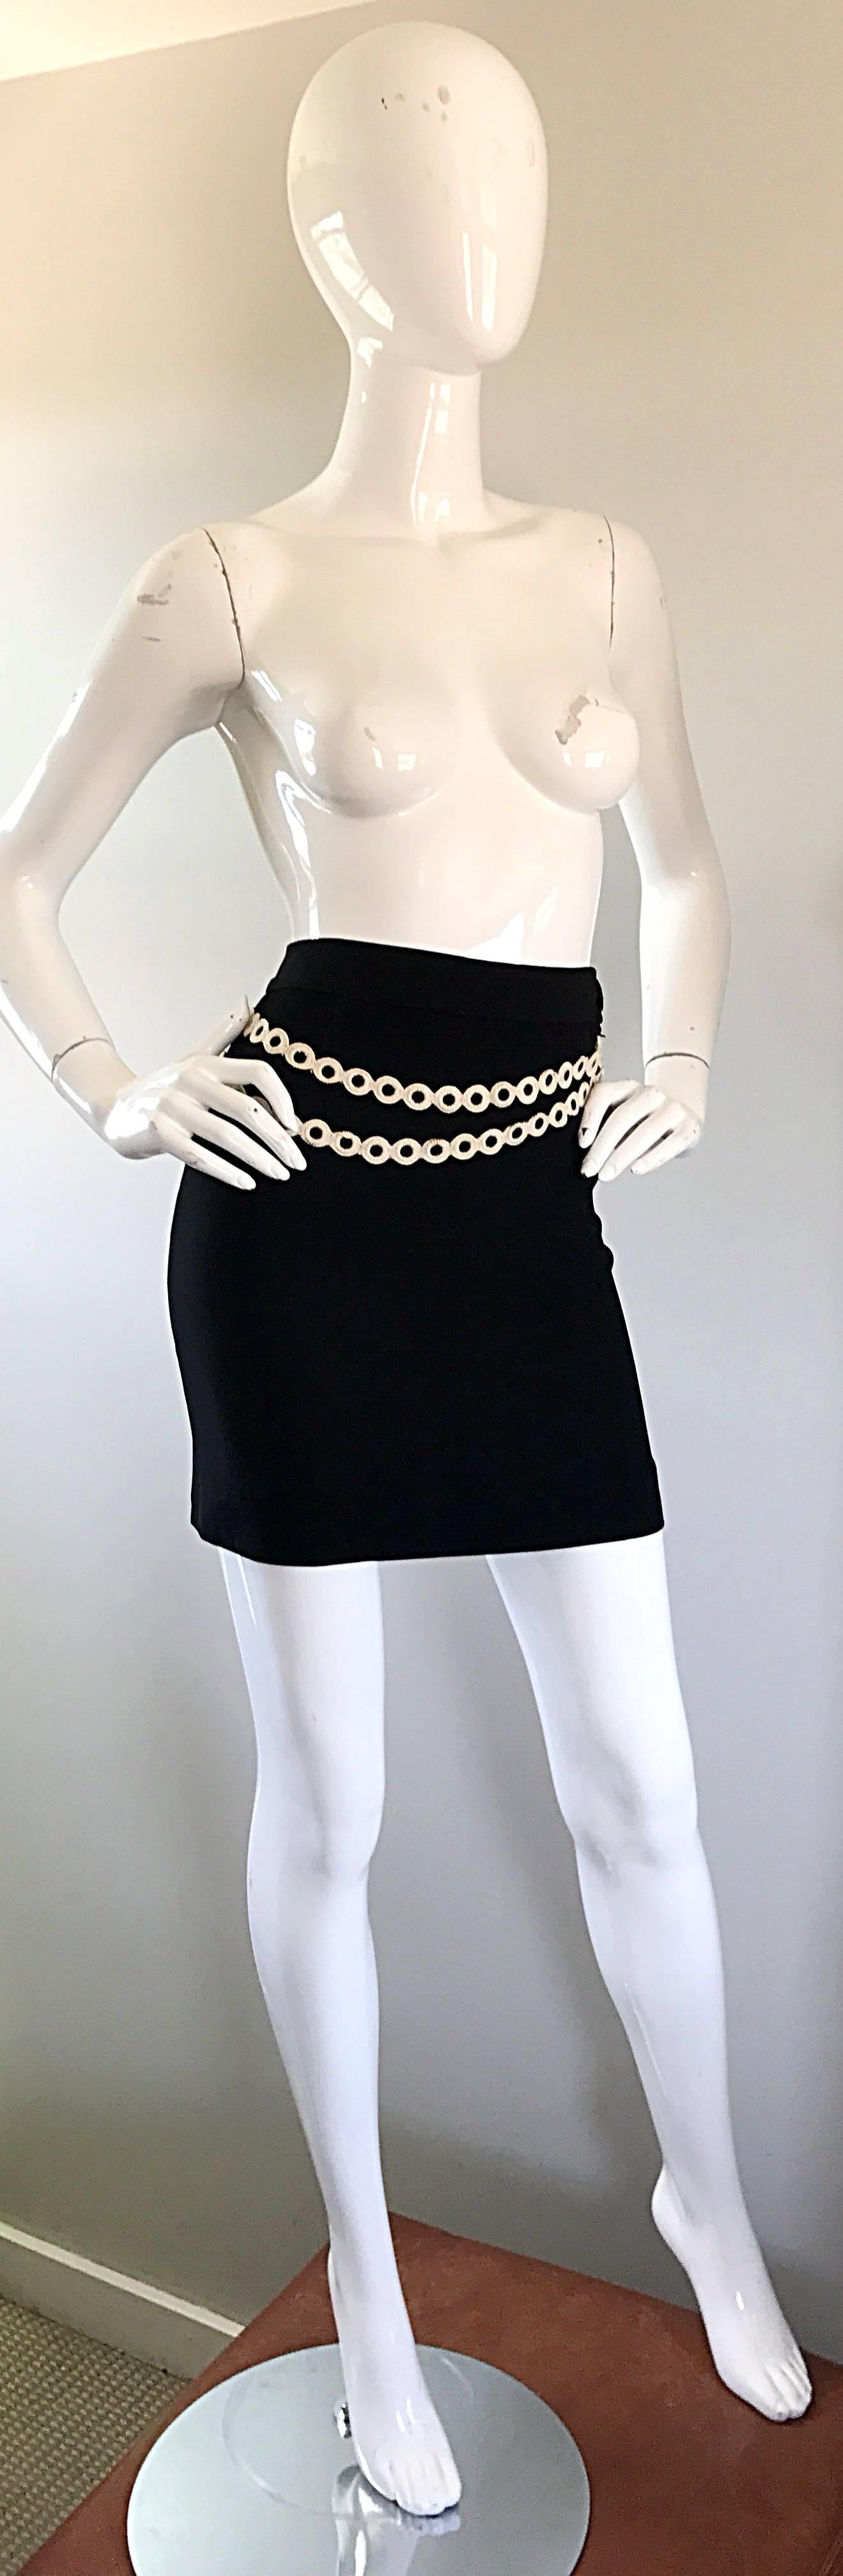 Women's 1990s Moschino Cheap and Chic Black and White Trompe l'oeil Vintage Mini Skirt For Sale